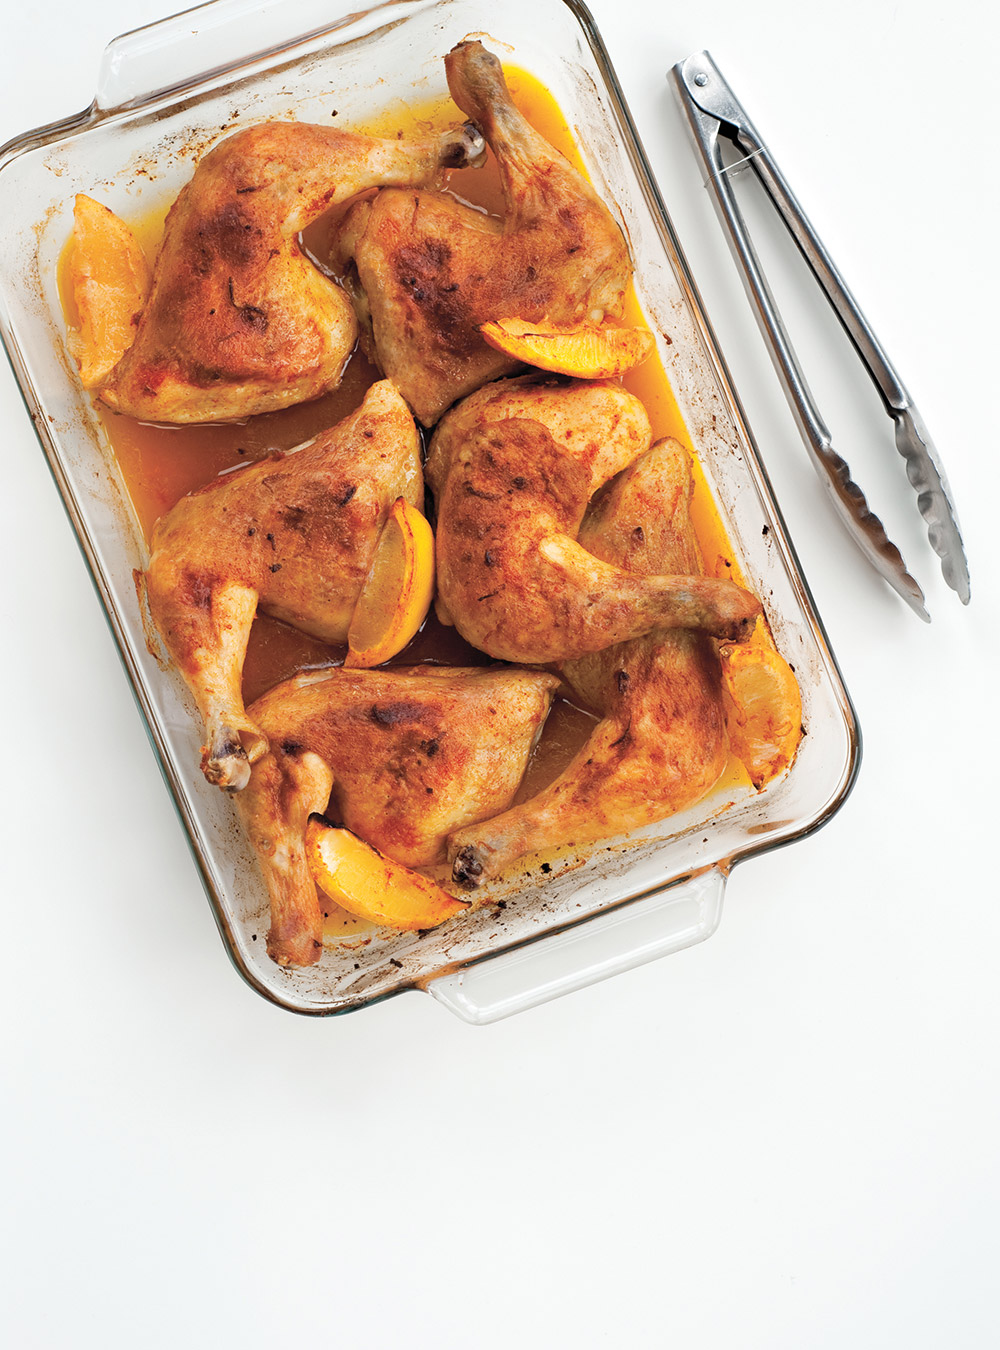 Lemon and Paprika Baked Chicken Legs   